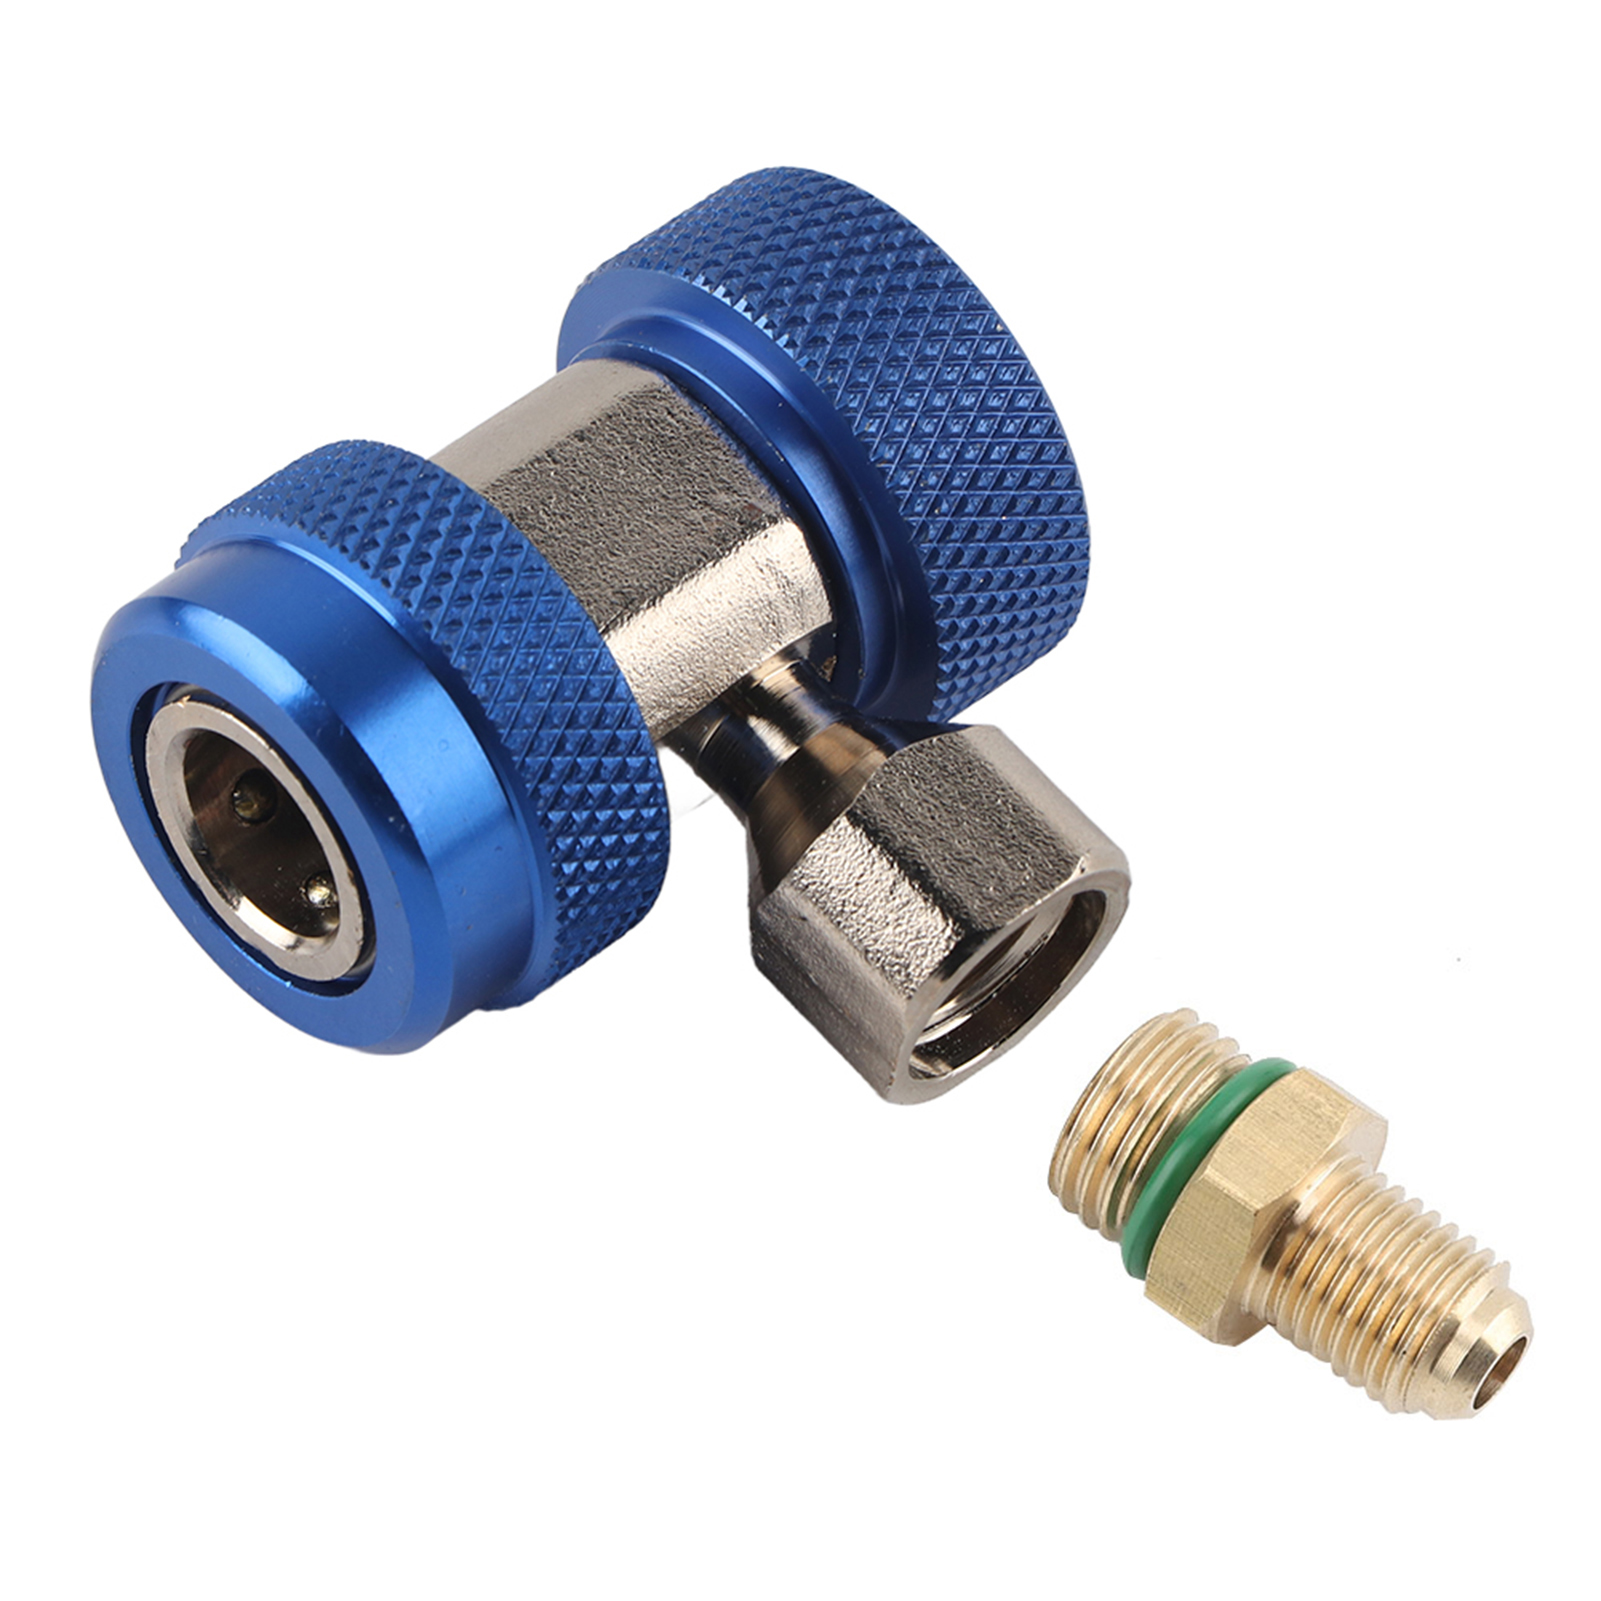 R134 Quick Coupler Adapter, AC Low High Quick Connector Conditioning Extractor Valve Core, AC Hose Fittings[Blue low pressure] - image 1 of 9